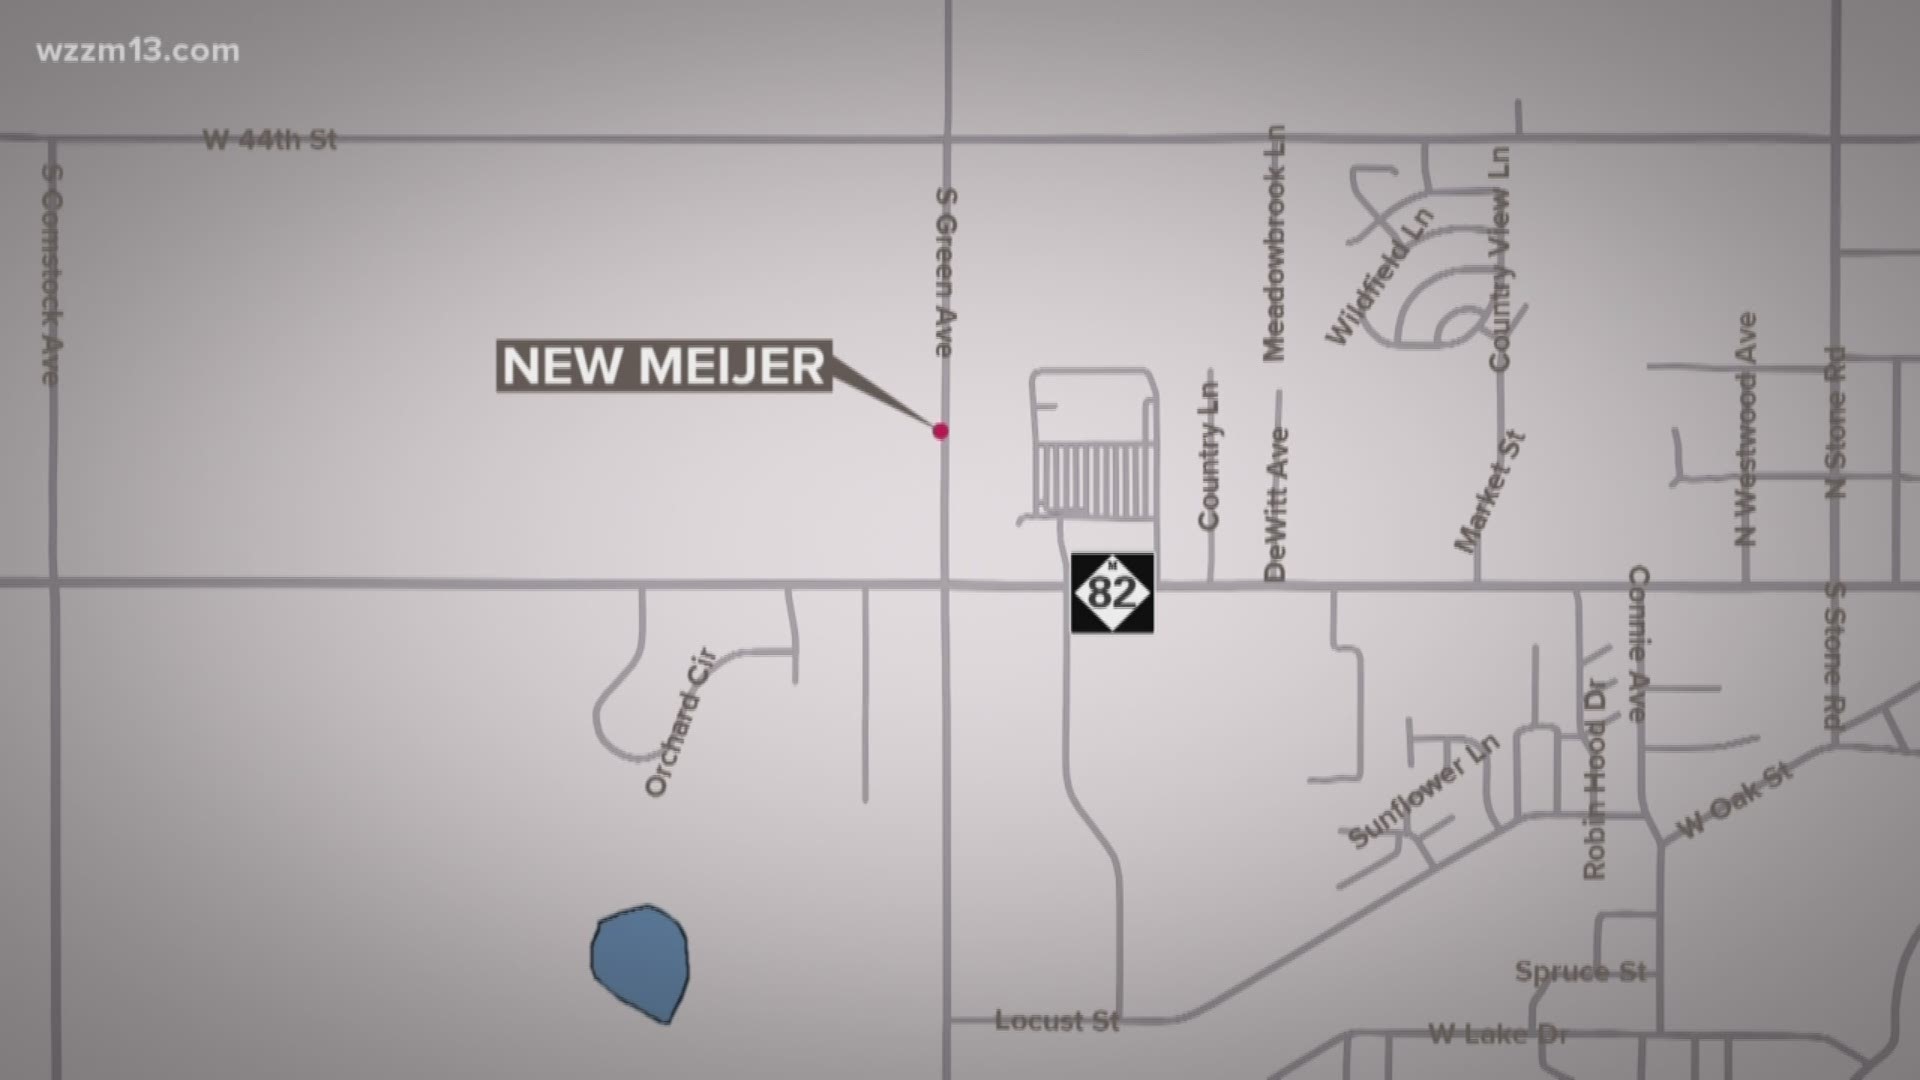 This will be Meijer's 116th supercenter in Michigan and is expected to create more than 300 jobs.